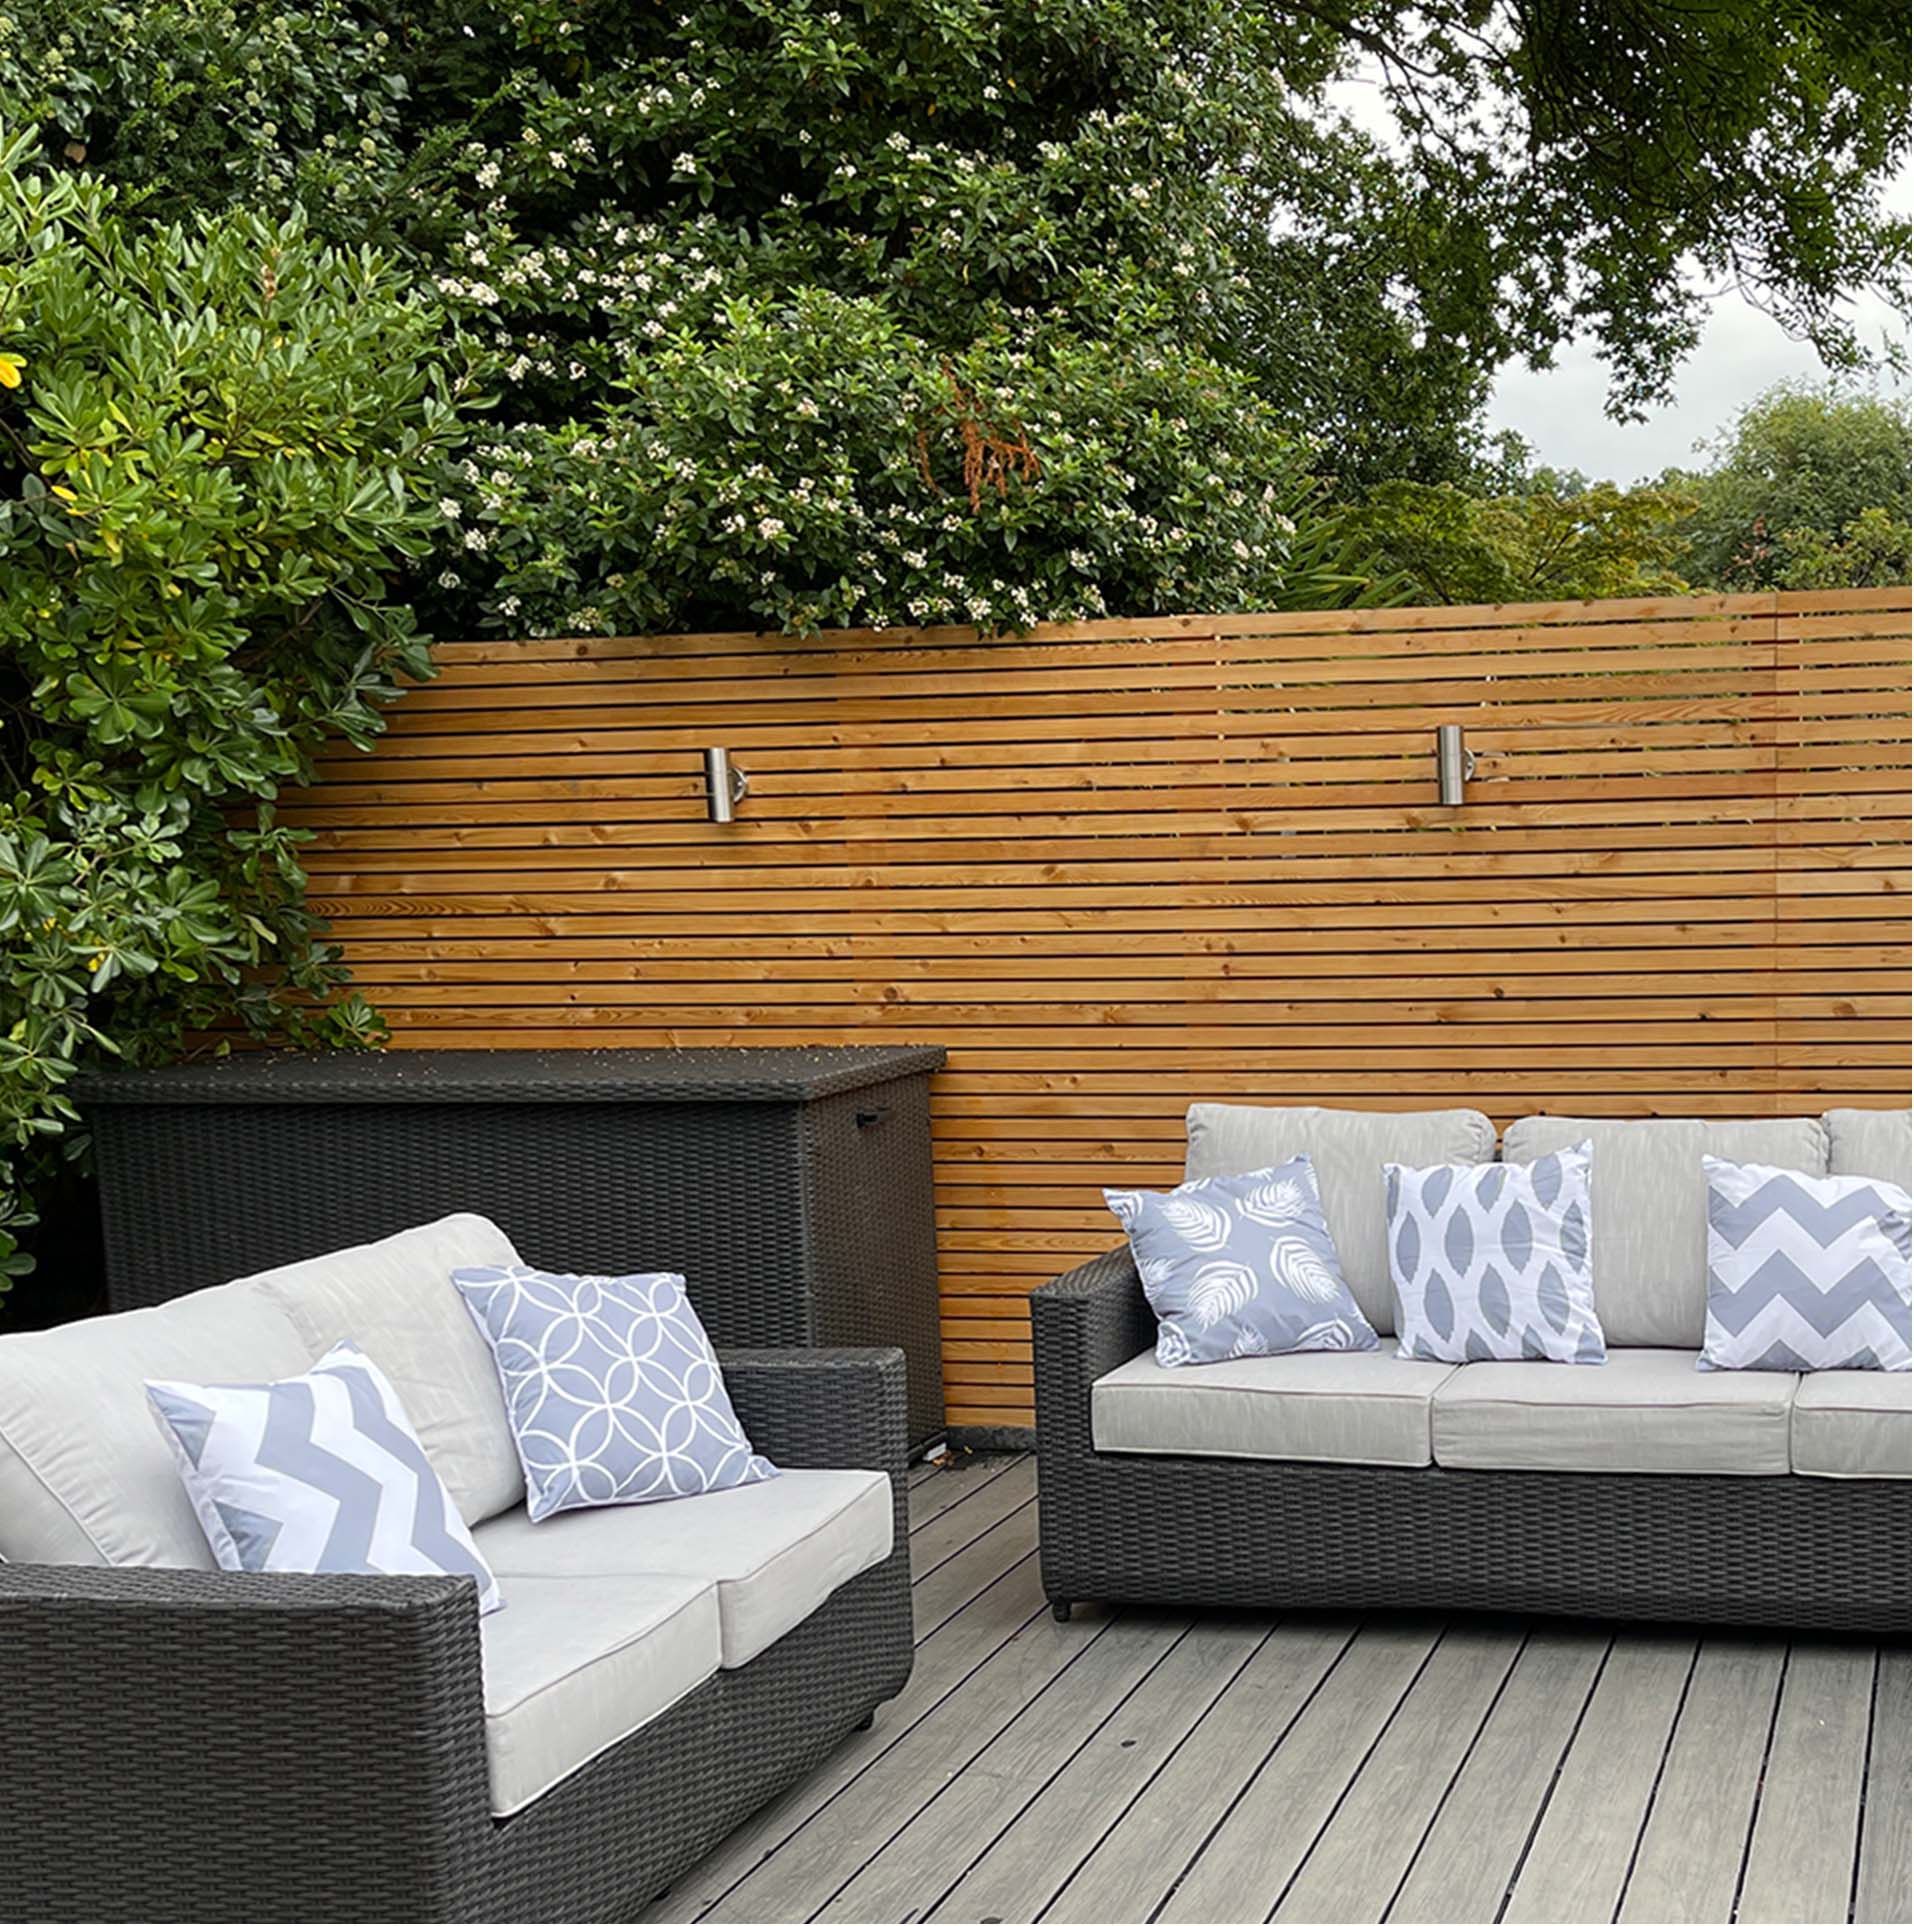 A shot of some seating on modern grey composite decking